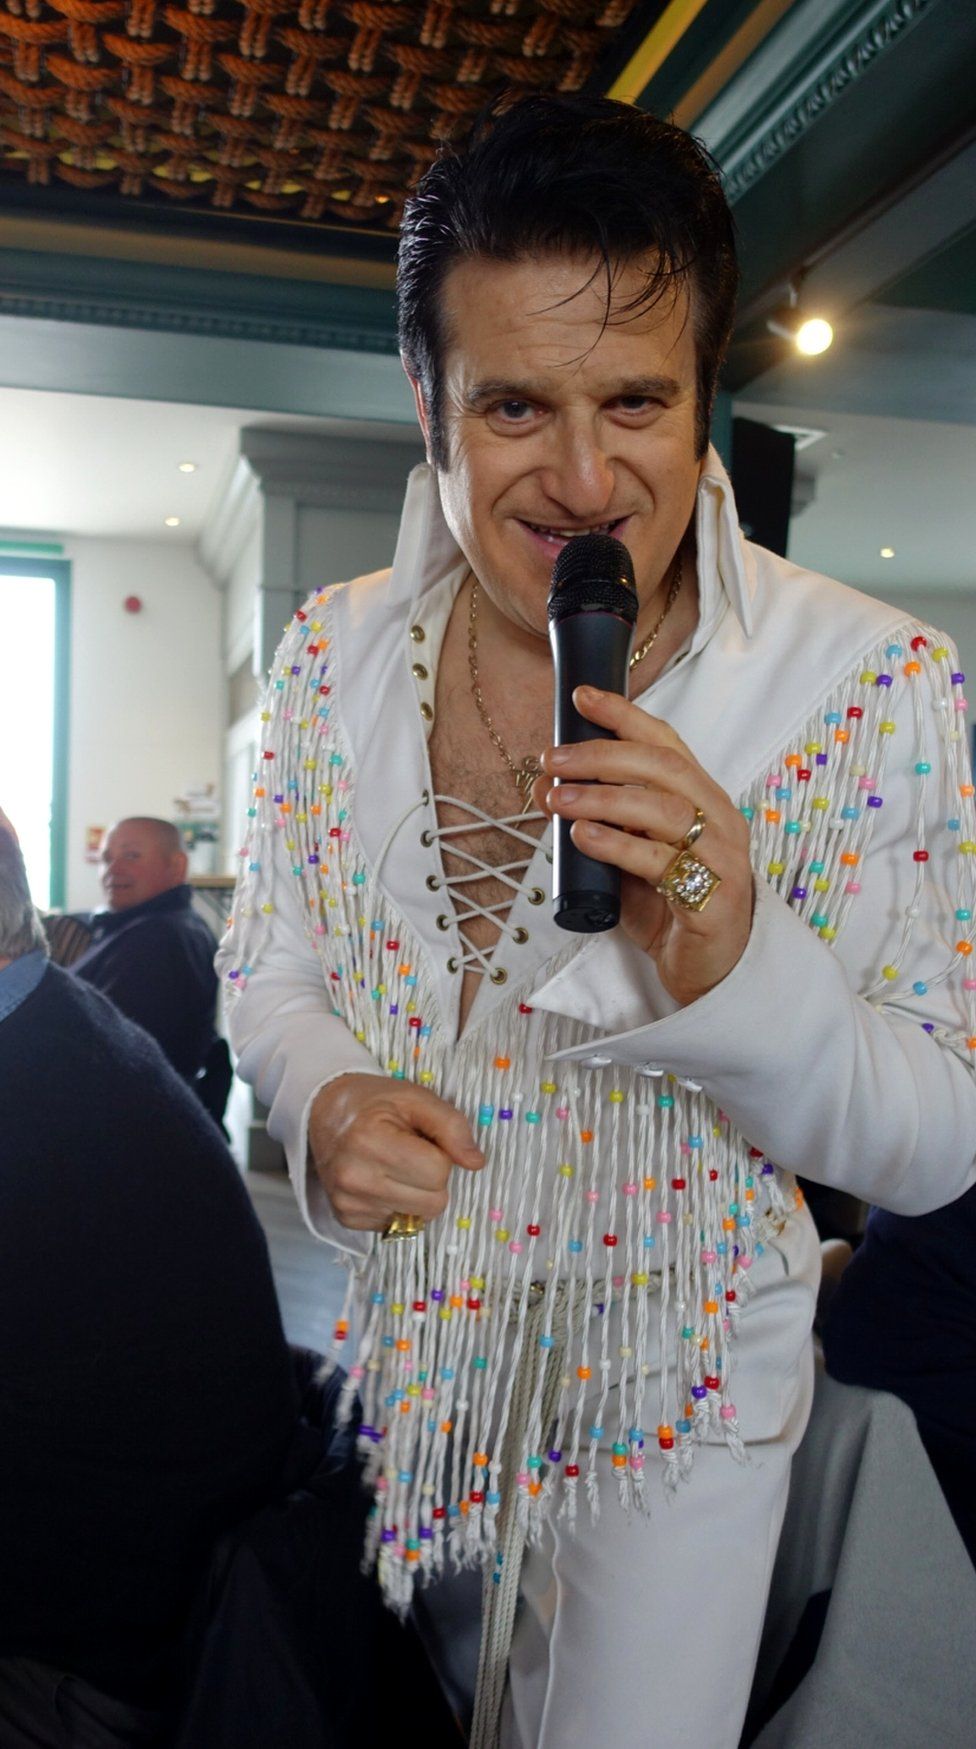 An Elvis impersonator dressed in frills holding a microphone to his lips